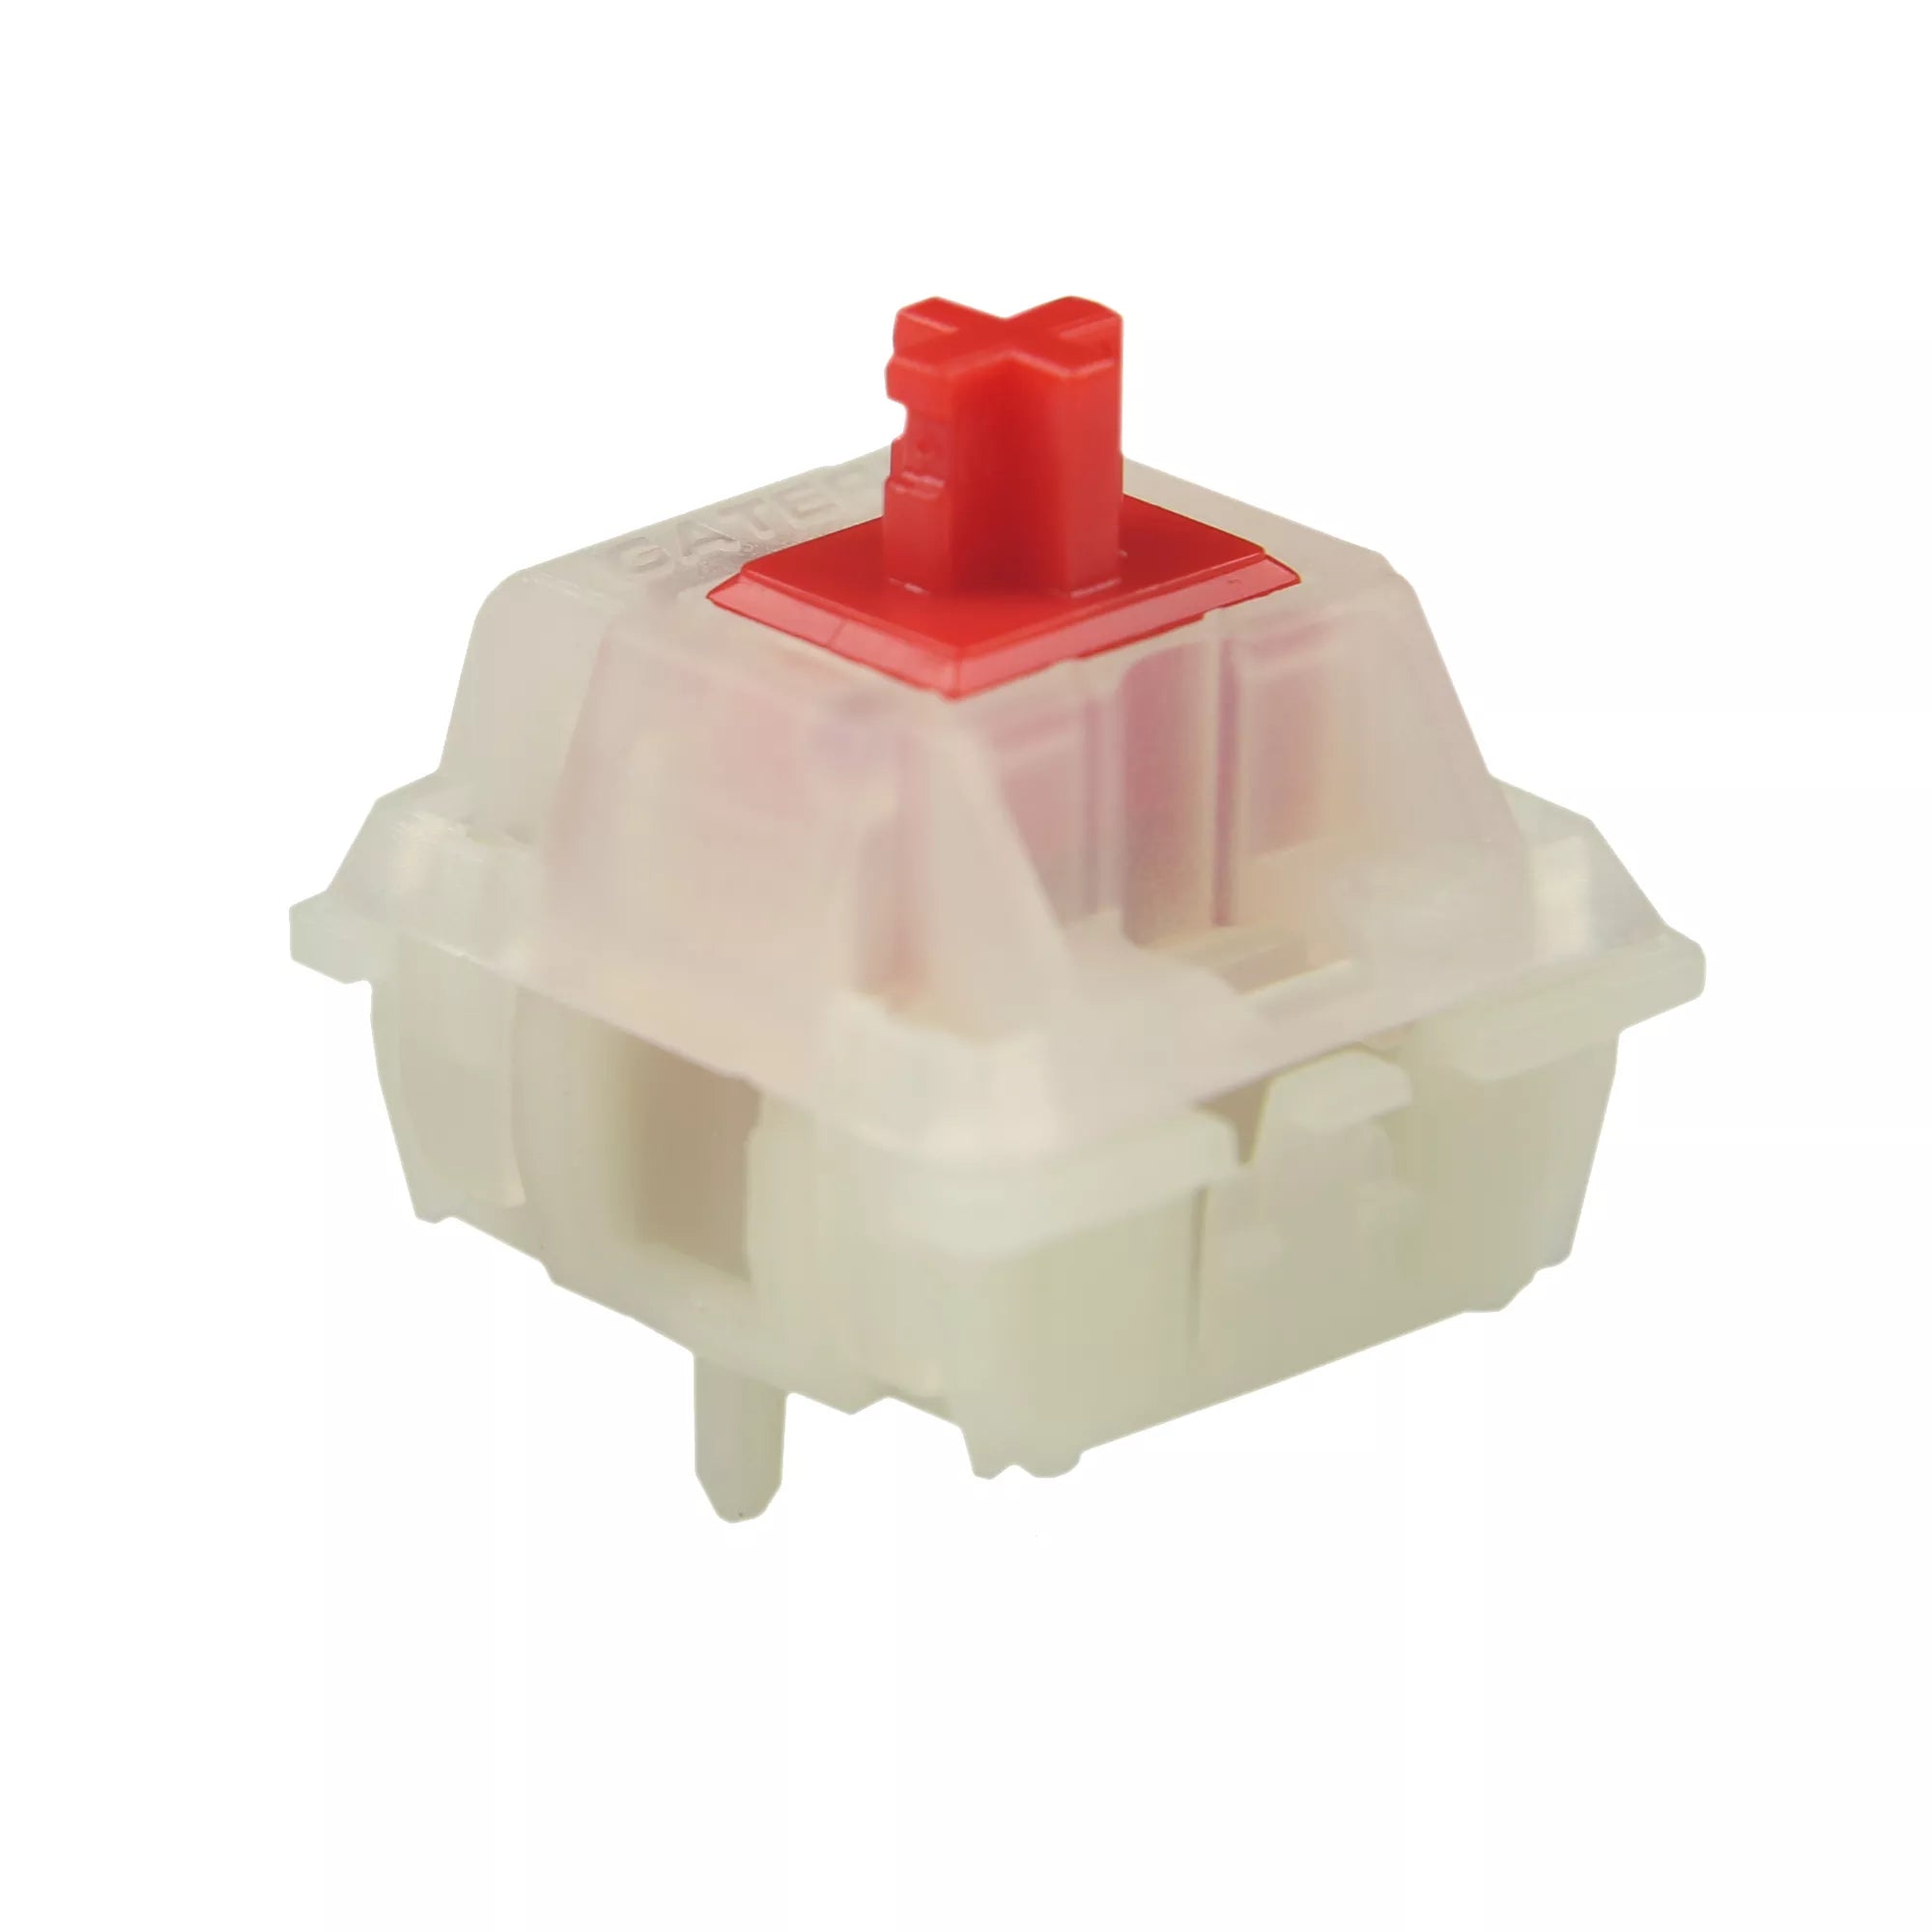 Gateron Pro Milky Red Switches - 45gf Linear Actuation - 35 Pack